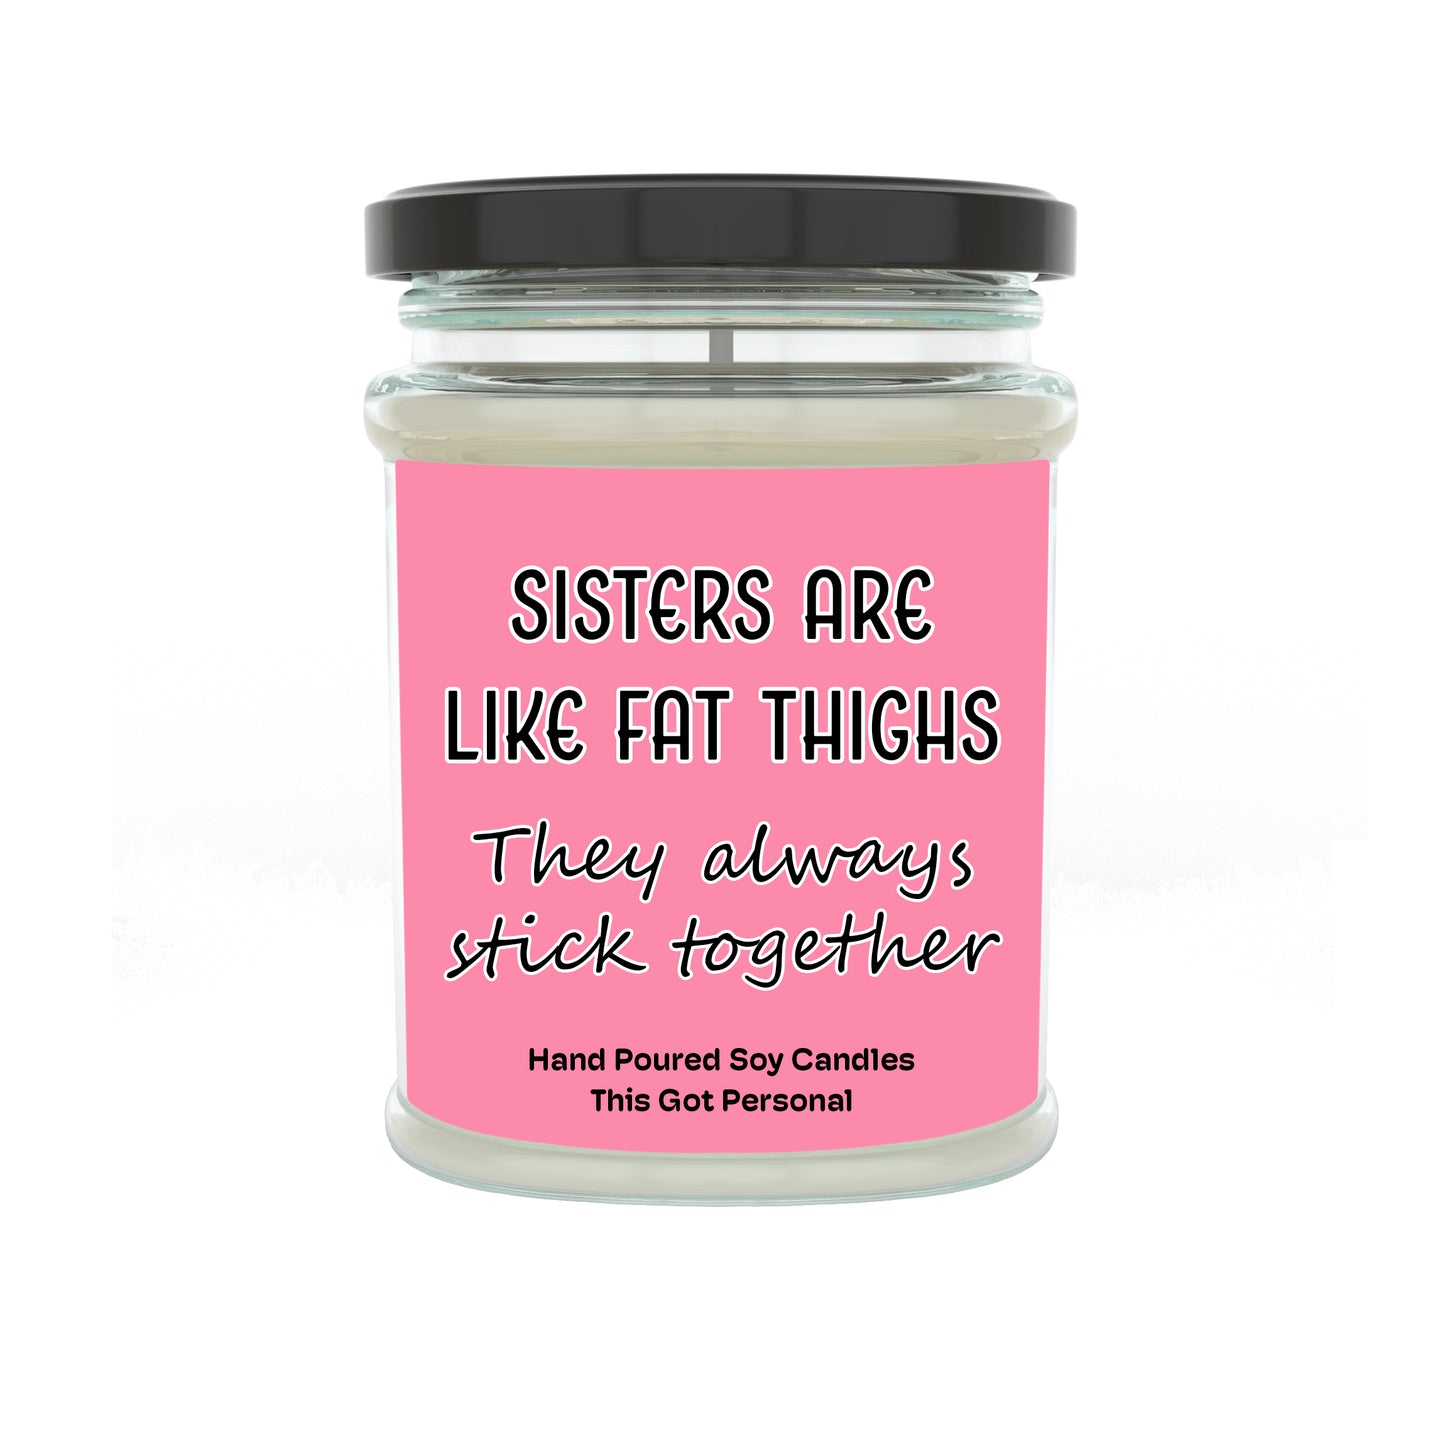 Sisters are like fat thighs